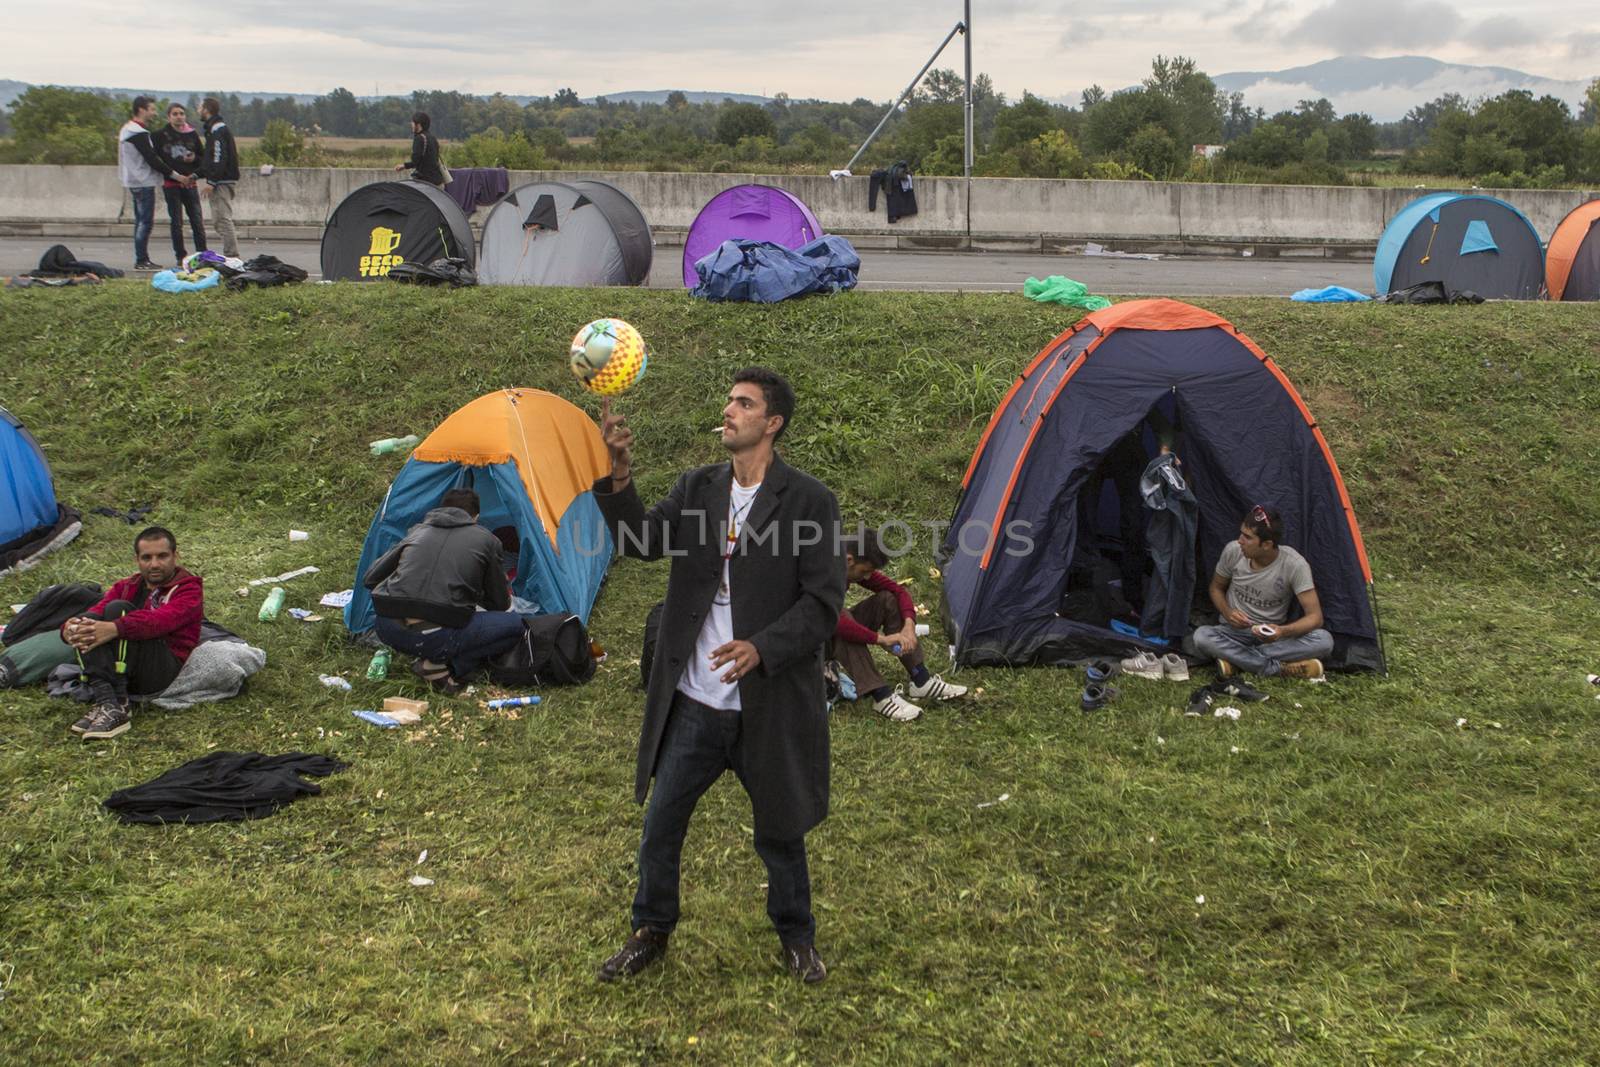 CROATIA, Harmica: One man smokes and plays soccer as refugees on the border between Croatia and Slovenia find ways to pass the time on September 20, 2015.  Refugees are at the mercy of European authorities as they attempt to escape their war-ravaged countries.